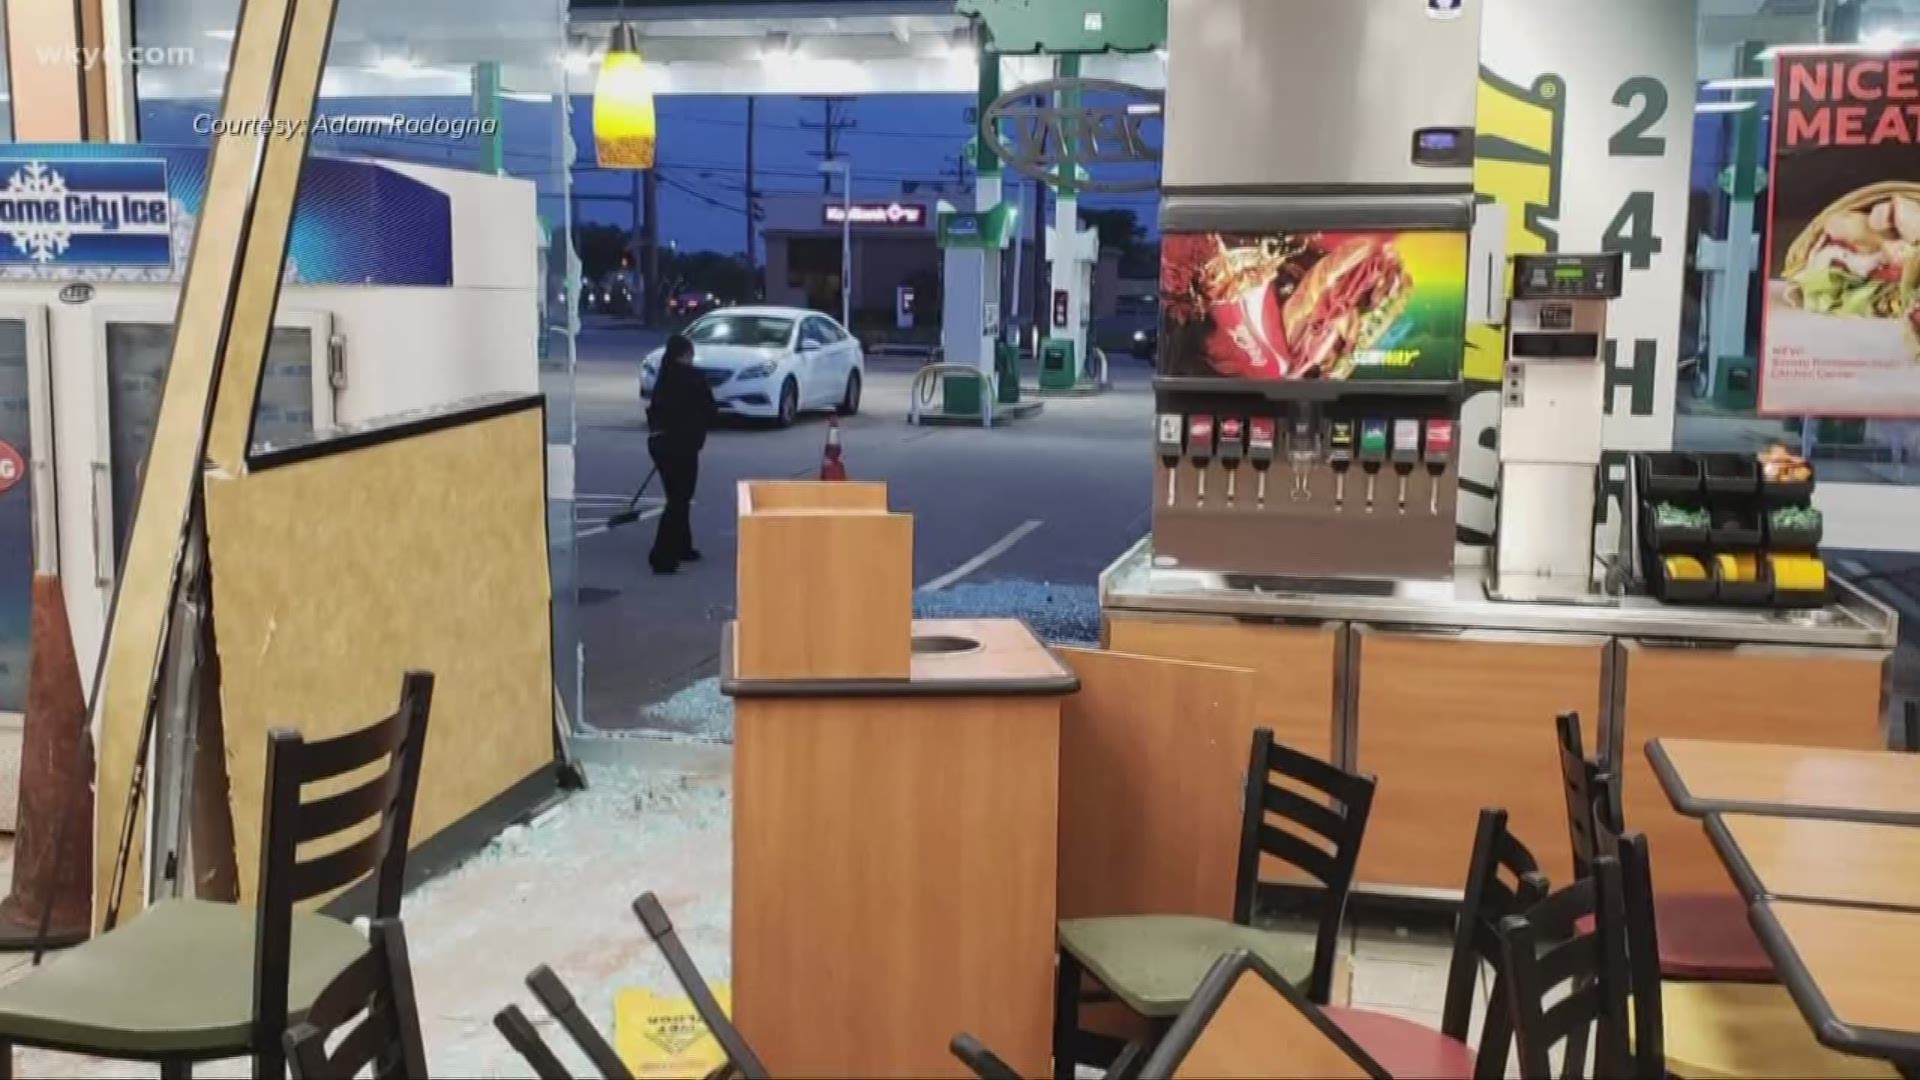 Thieves steal ATM during smash and grab at Parma 7-Eleven store